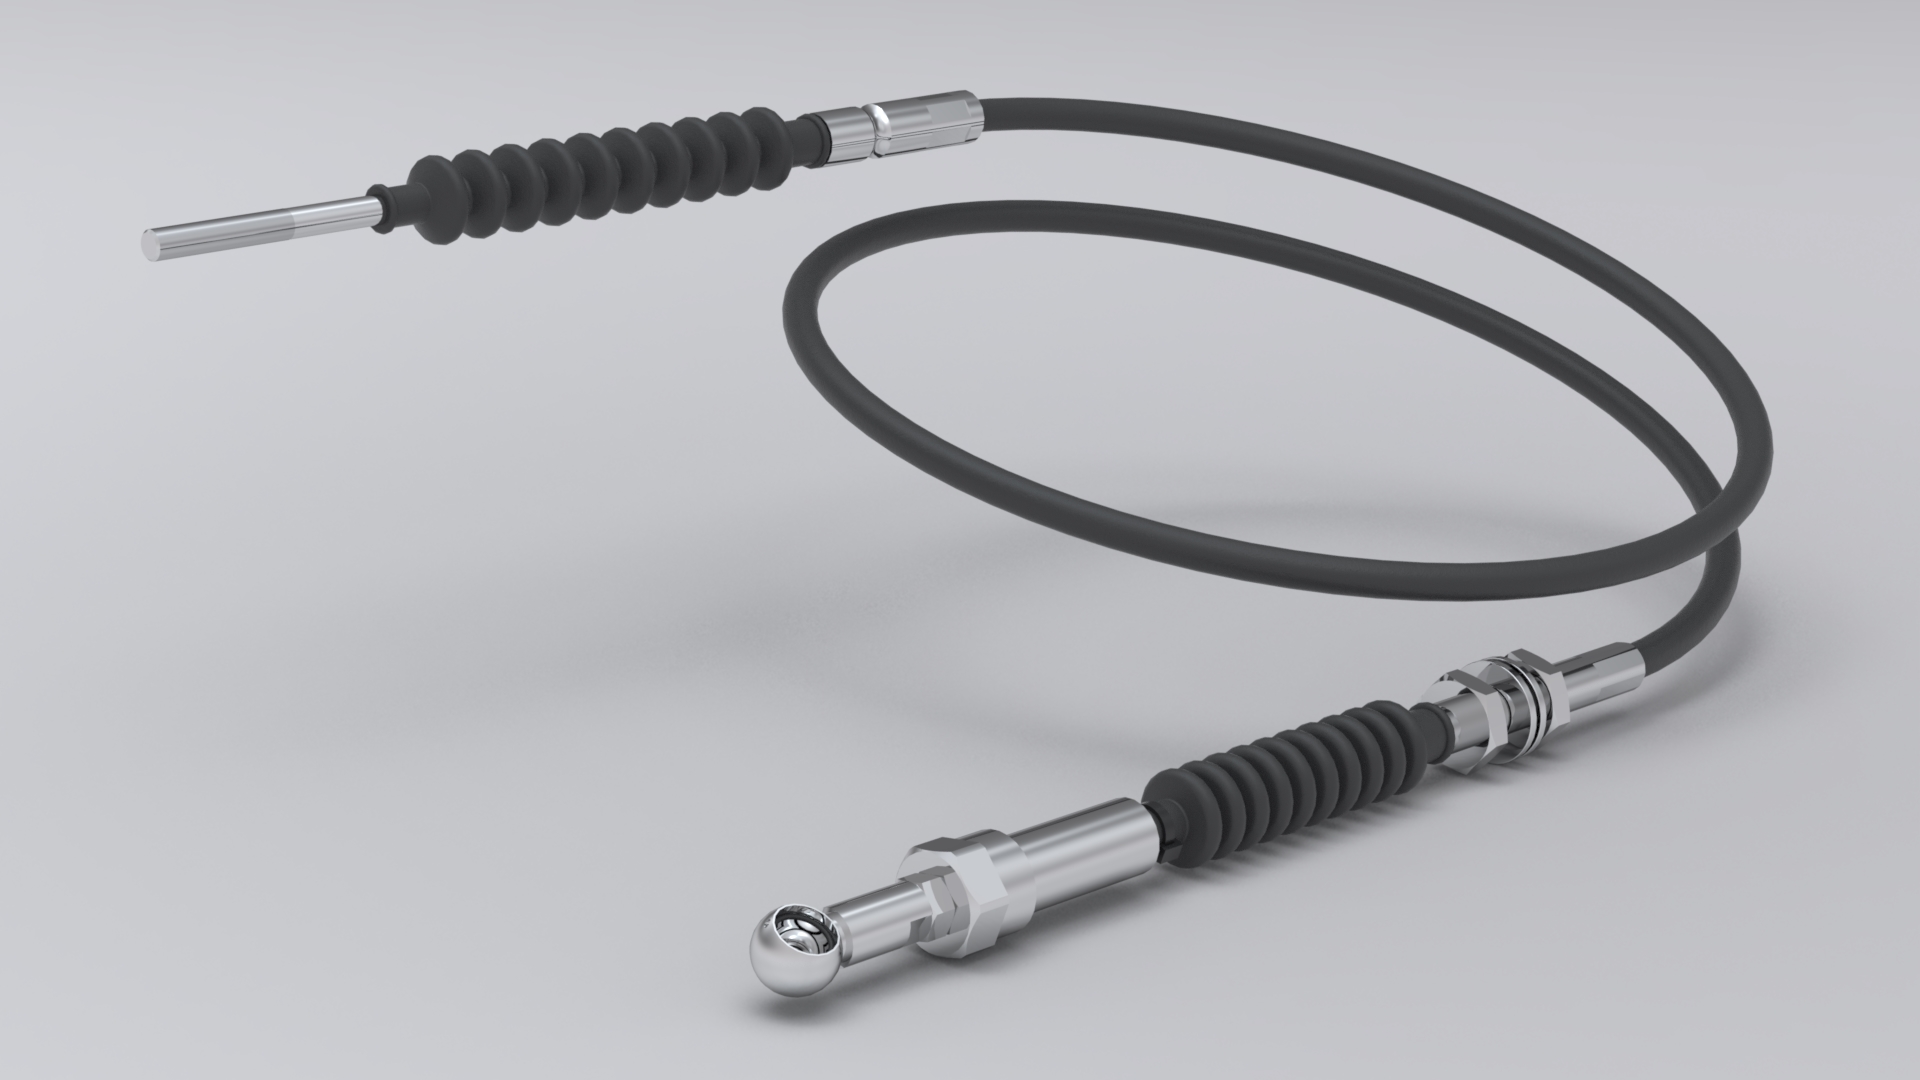 Foot Throttle Cable